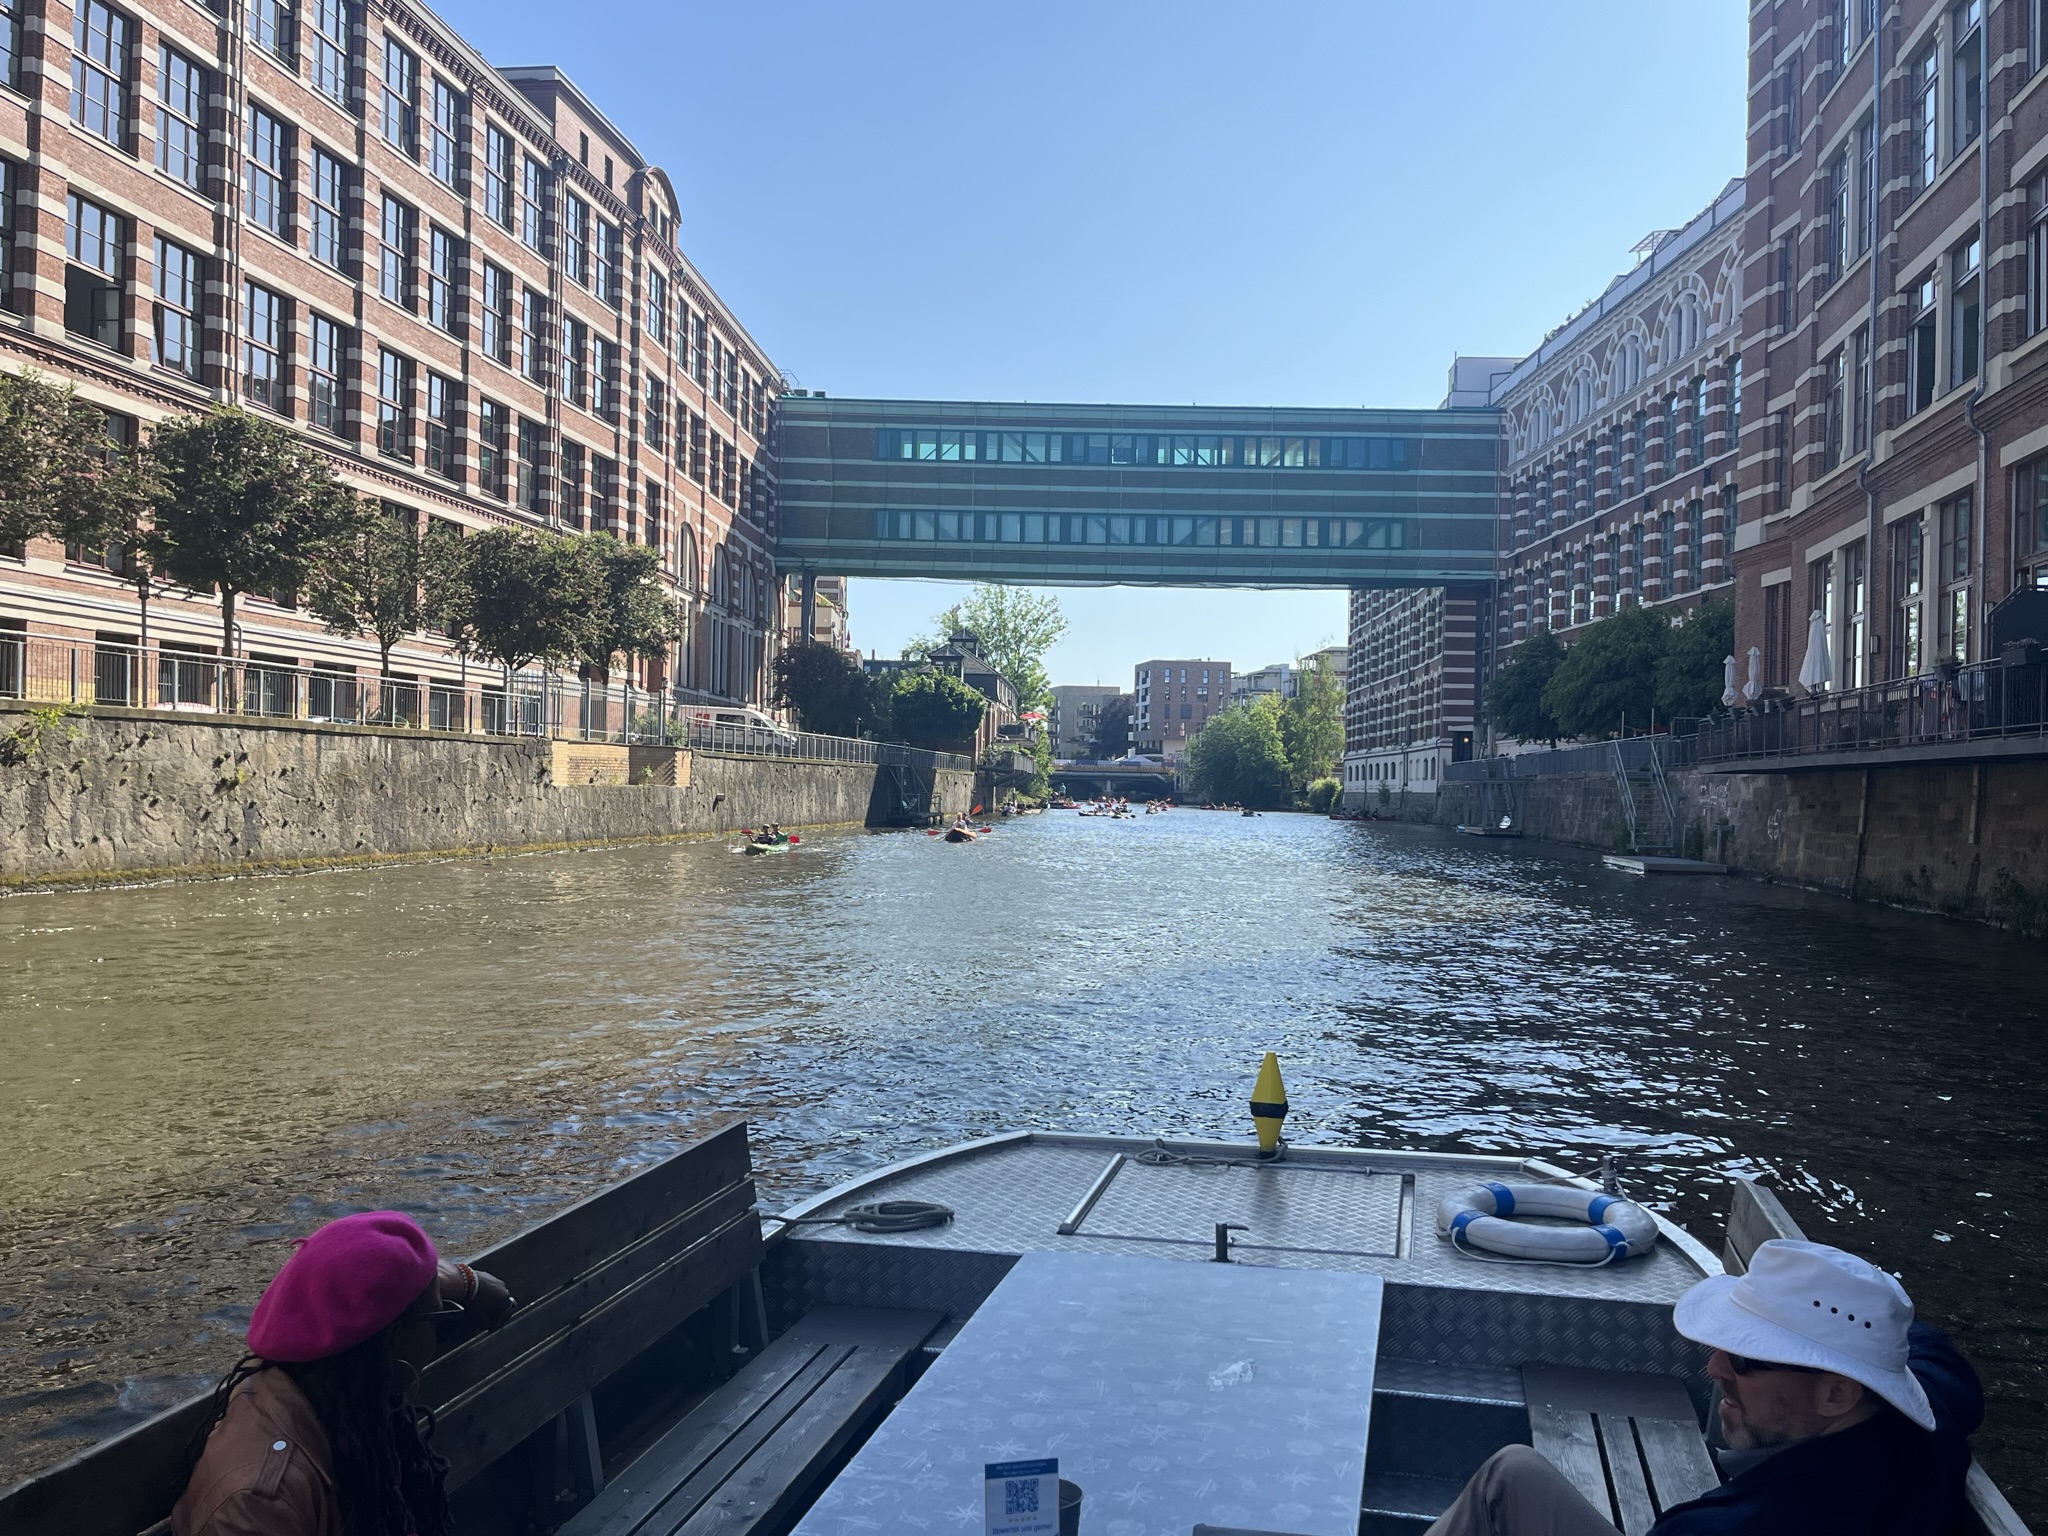 For a relaxing tour of Leipzig, take a boat ride down the Karl Heine Canal.